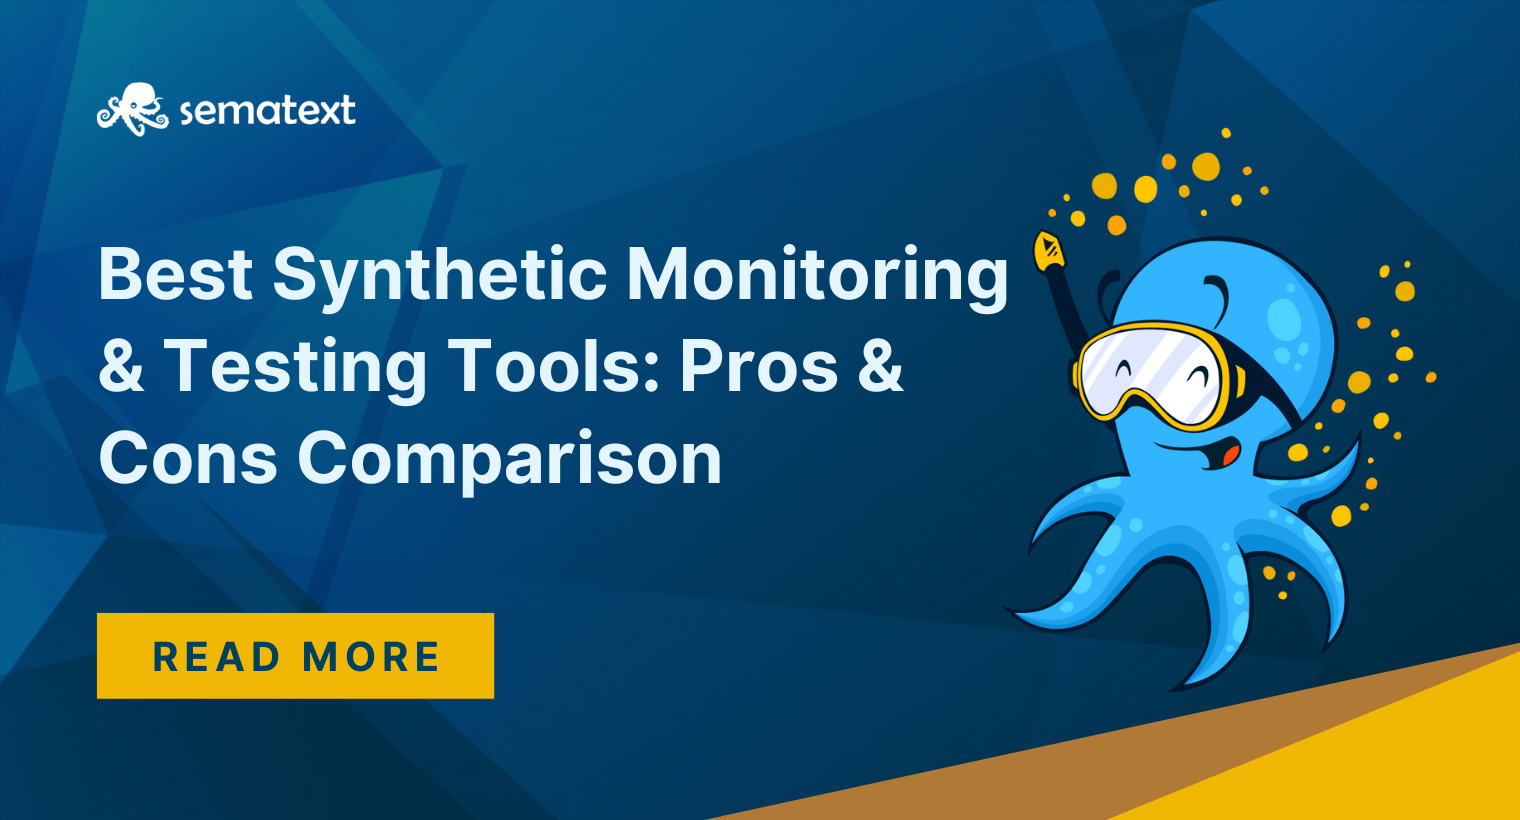 10 Best Synthetic Monitoring & Testing Tools of 2023: Pros & Cons Comparison